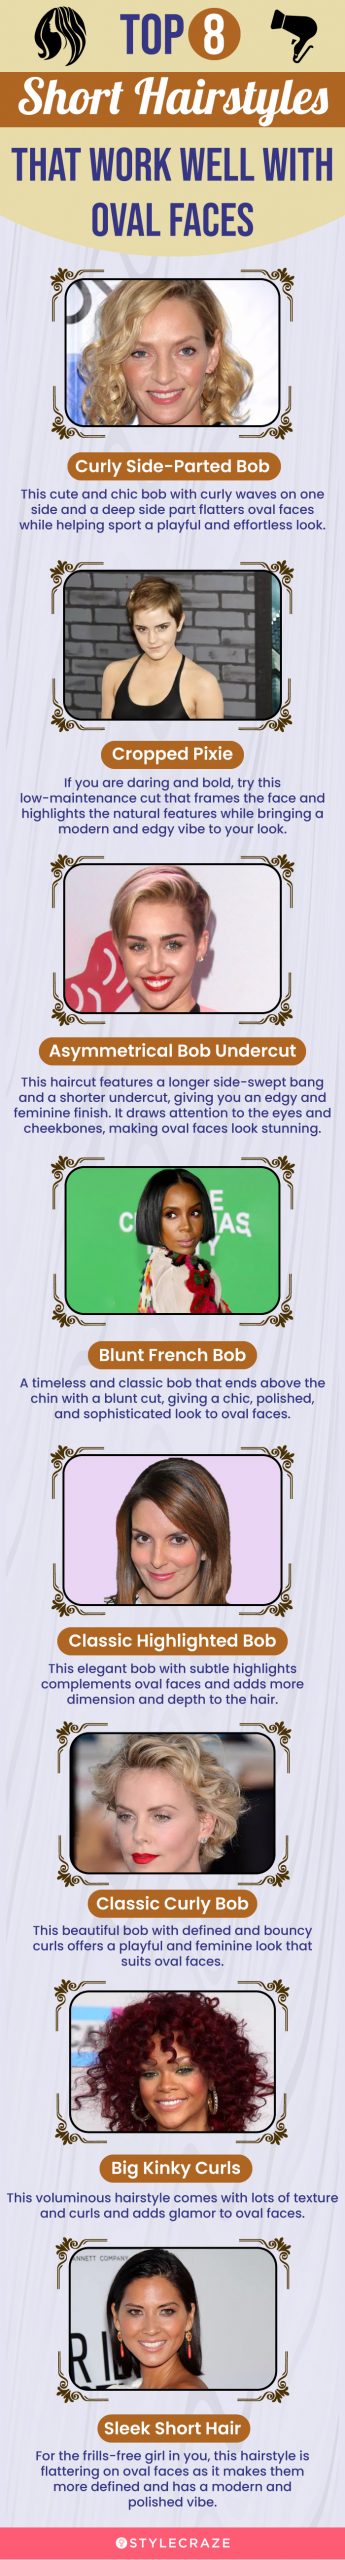 top 8 short hairstyles that work well with oval faces (infographic)